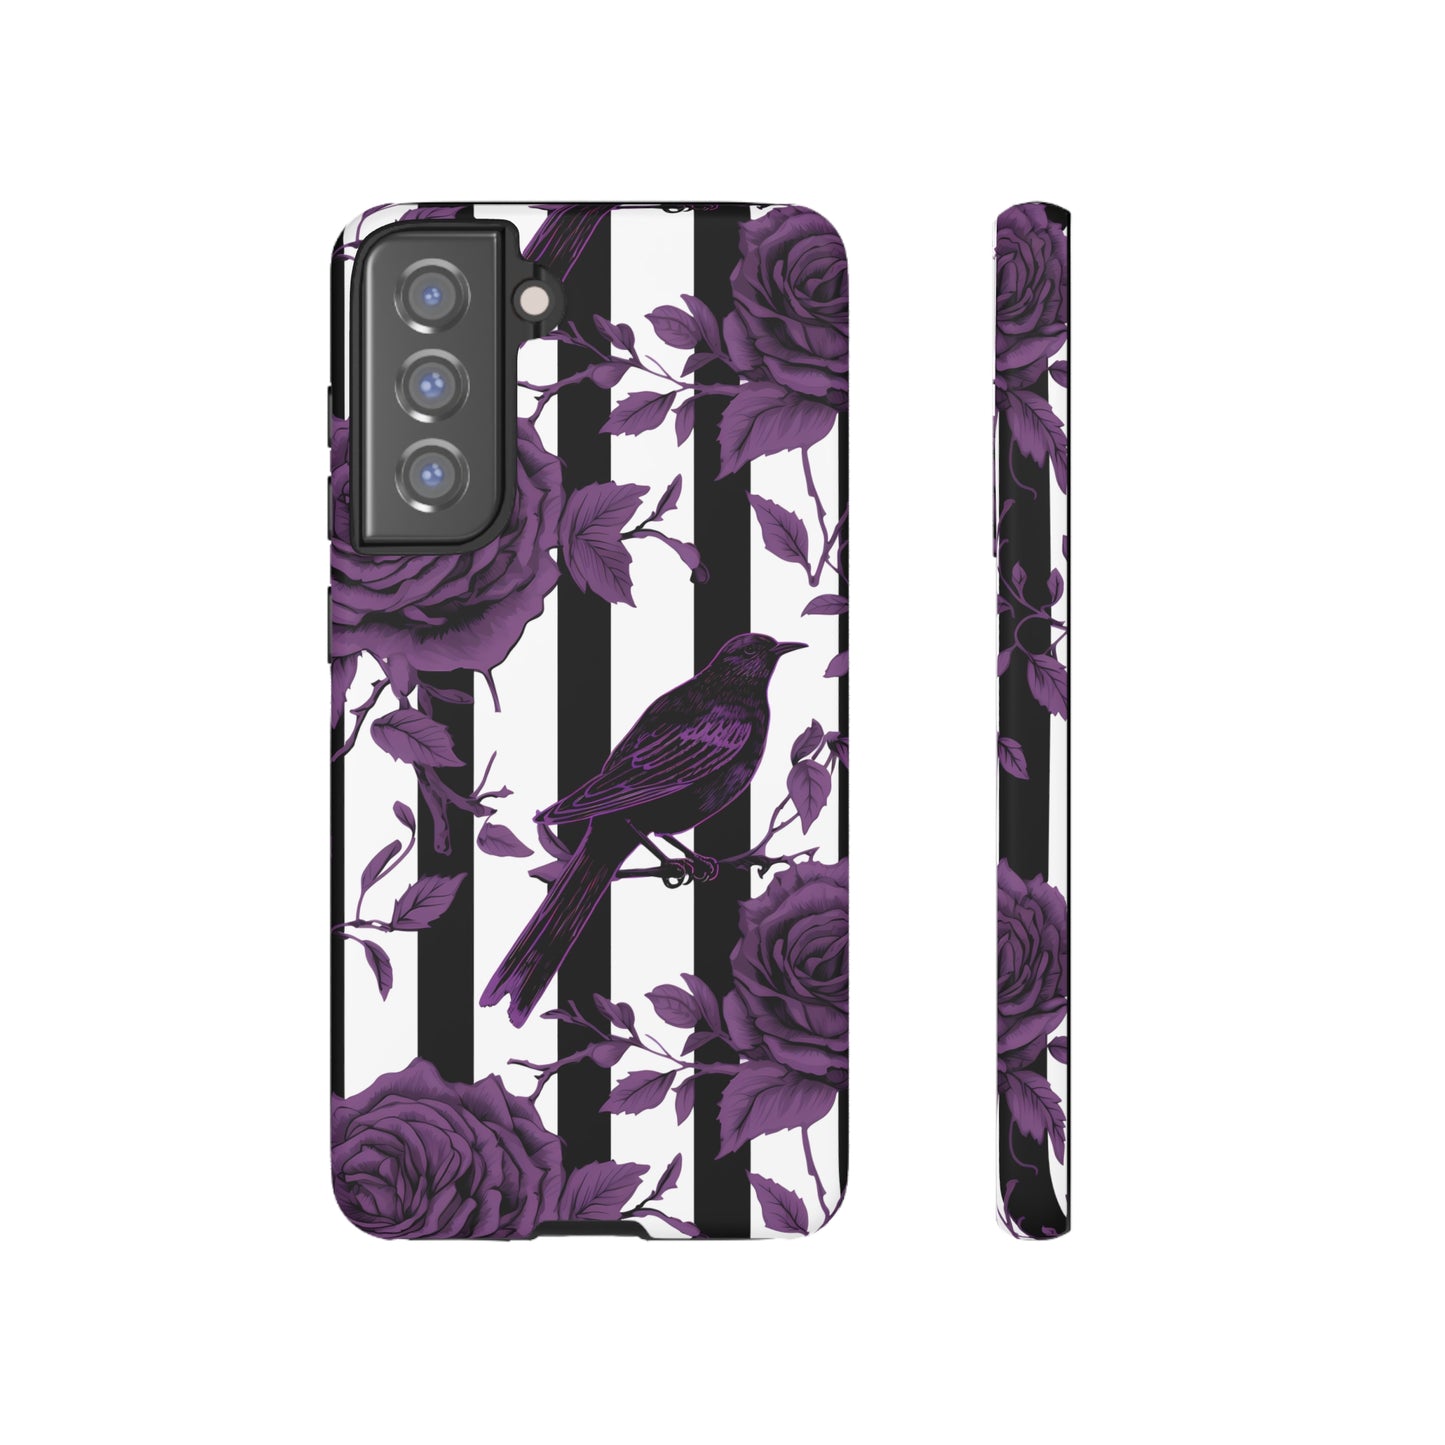 Striped Crows and Roses Tough Cases for iPhone Samsung Google PhonesPhone CaseVTZdesignsSamsung Galaxy S21 FEMatteAccessoriescrowsGlossy